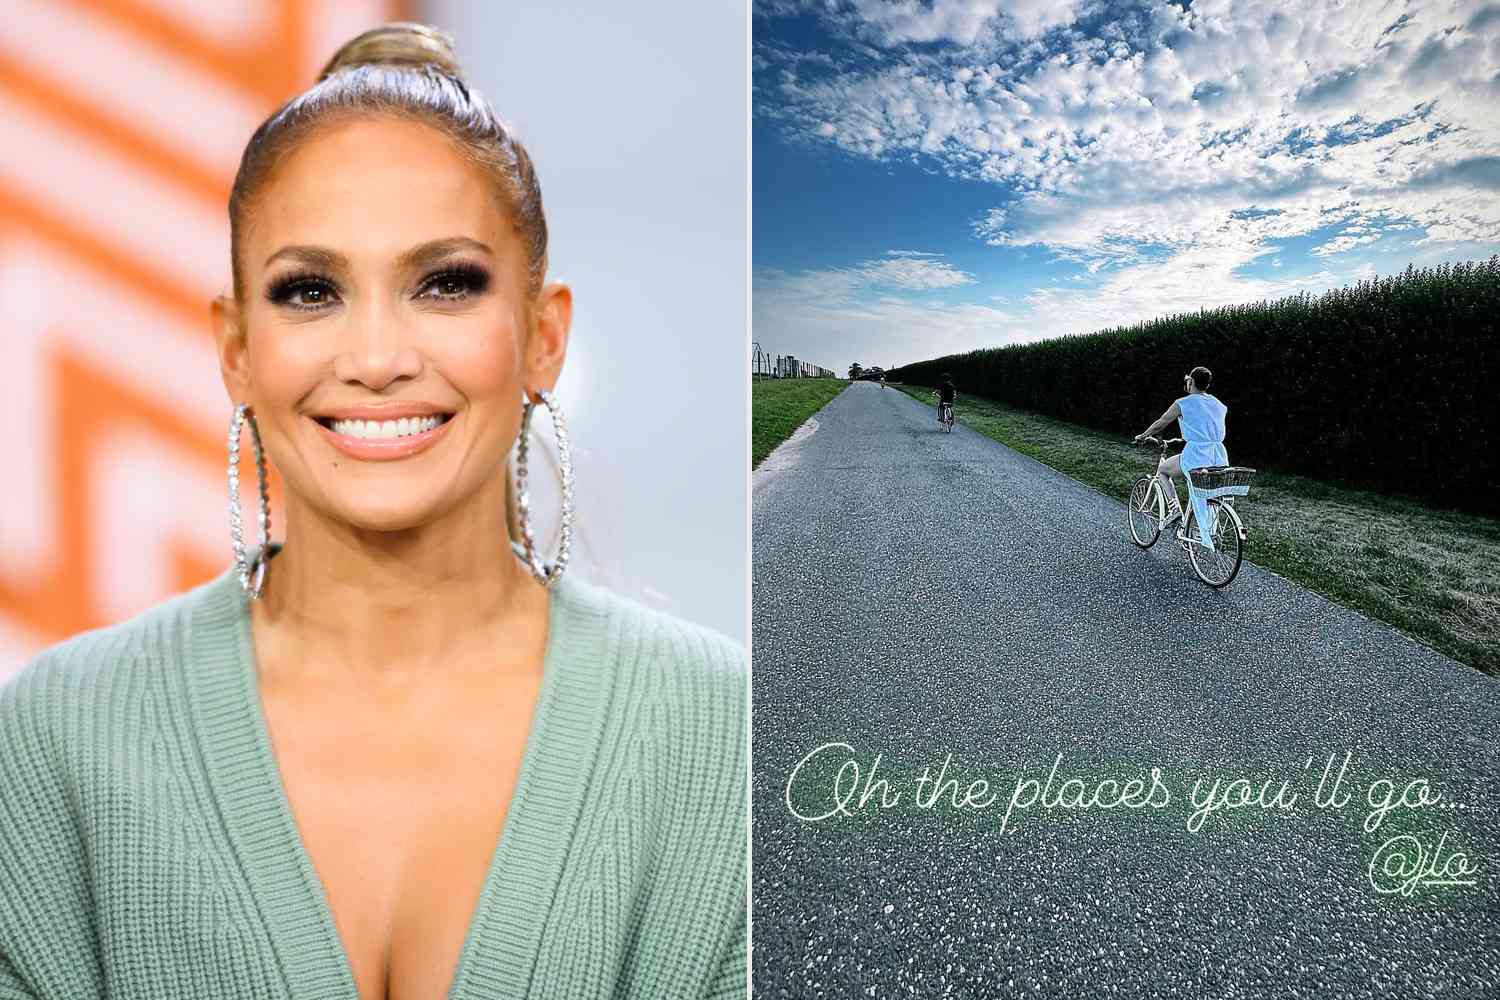 Jennifer Lopez Shares Sunny Photo Bike Riding in the Hamptons: 'Oh the Places You'll Go'